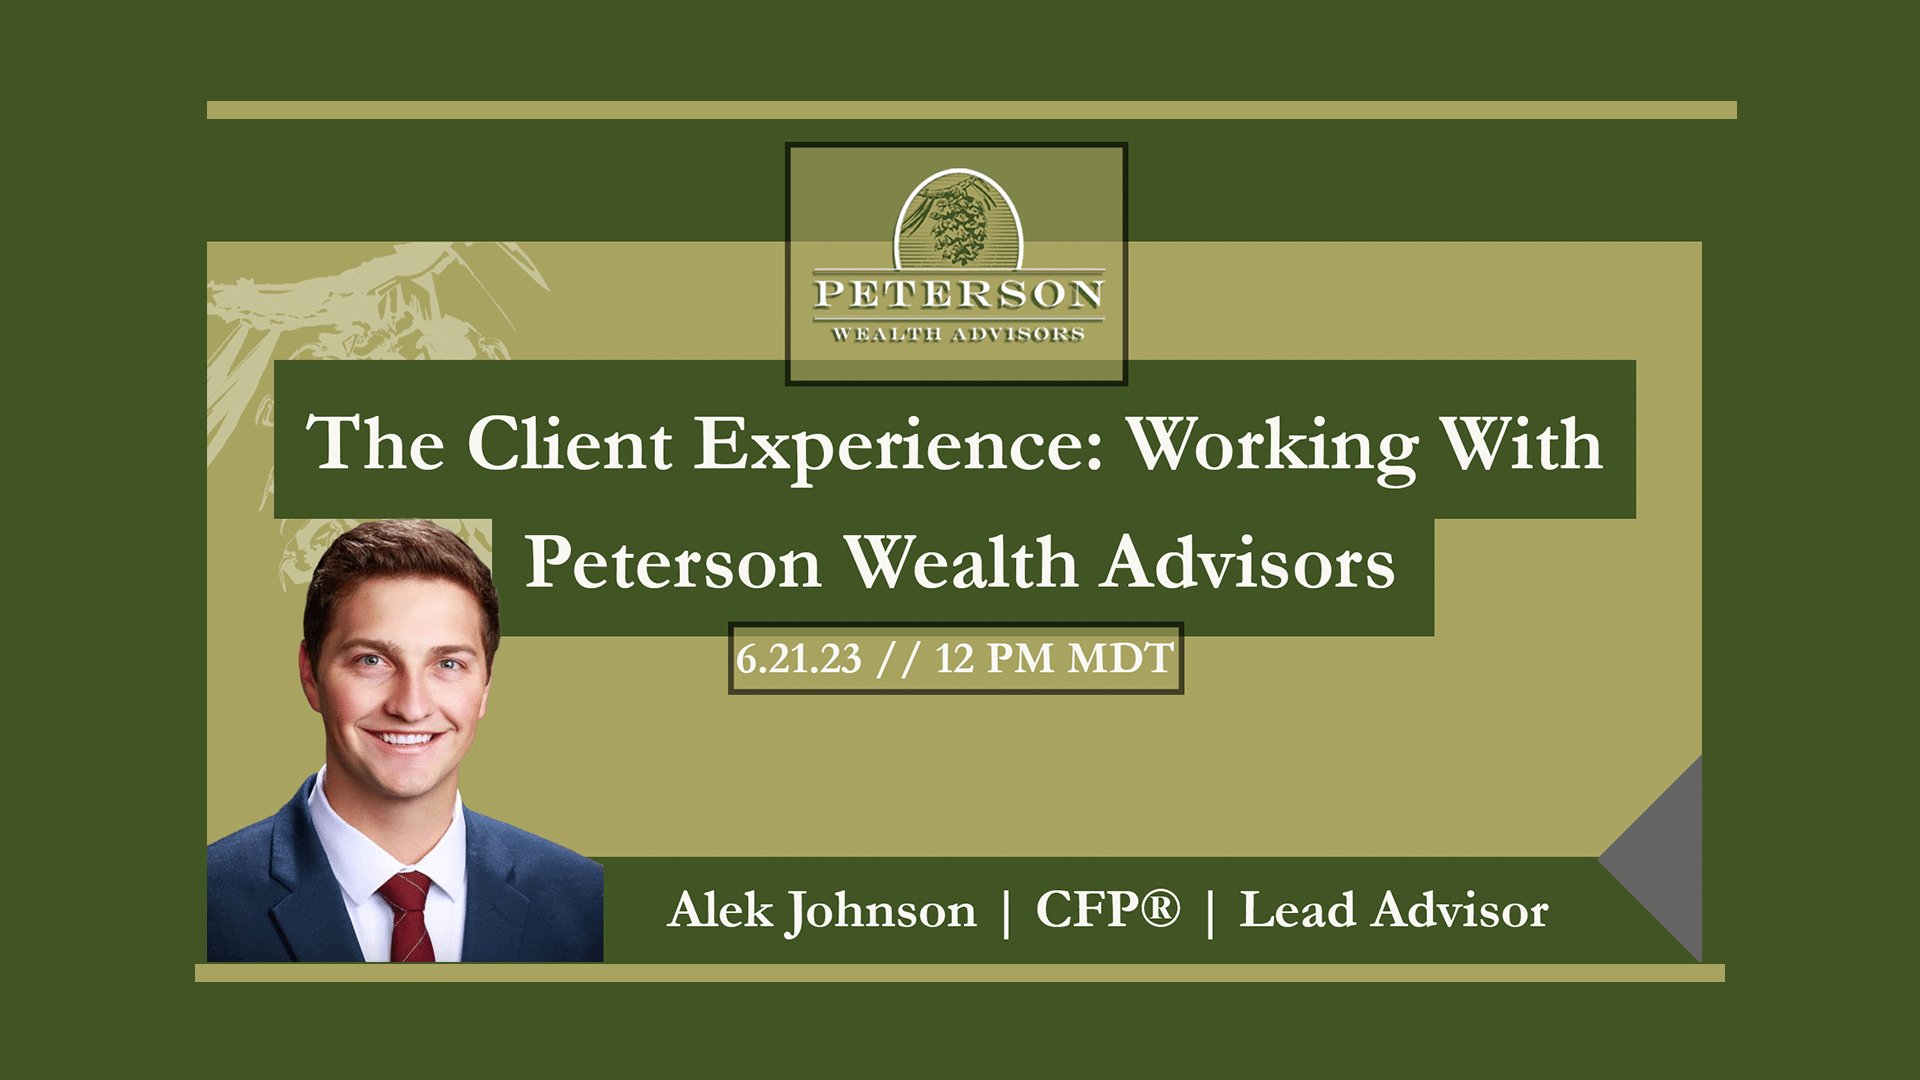 The Client Experience: Working With Peterson Wealth Advisors